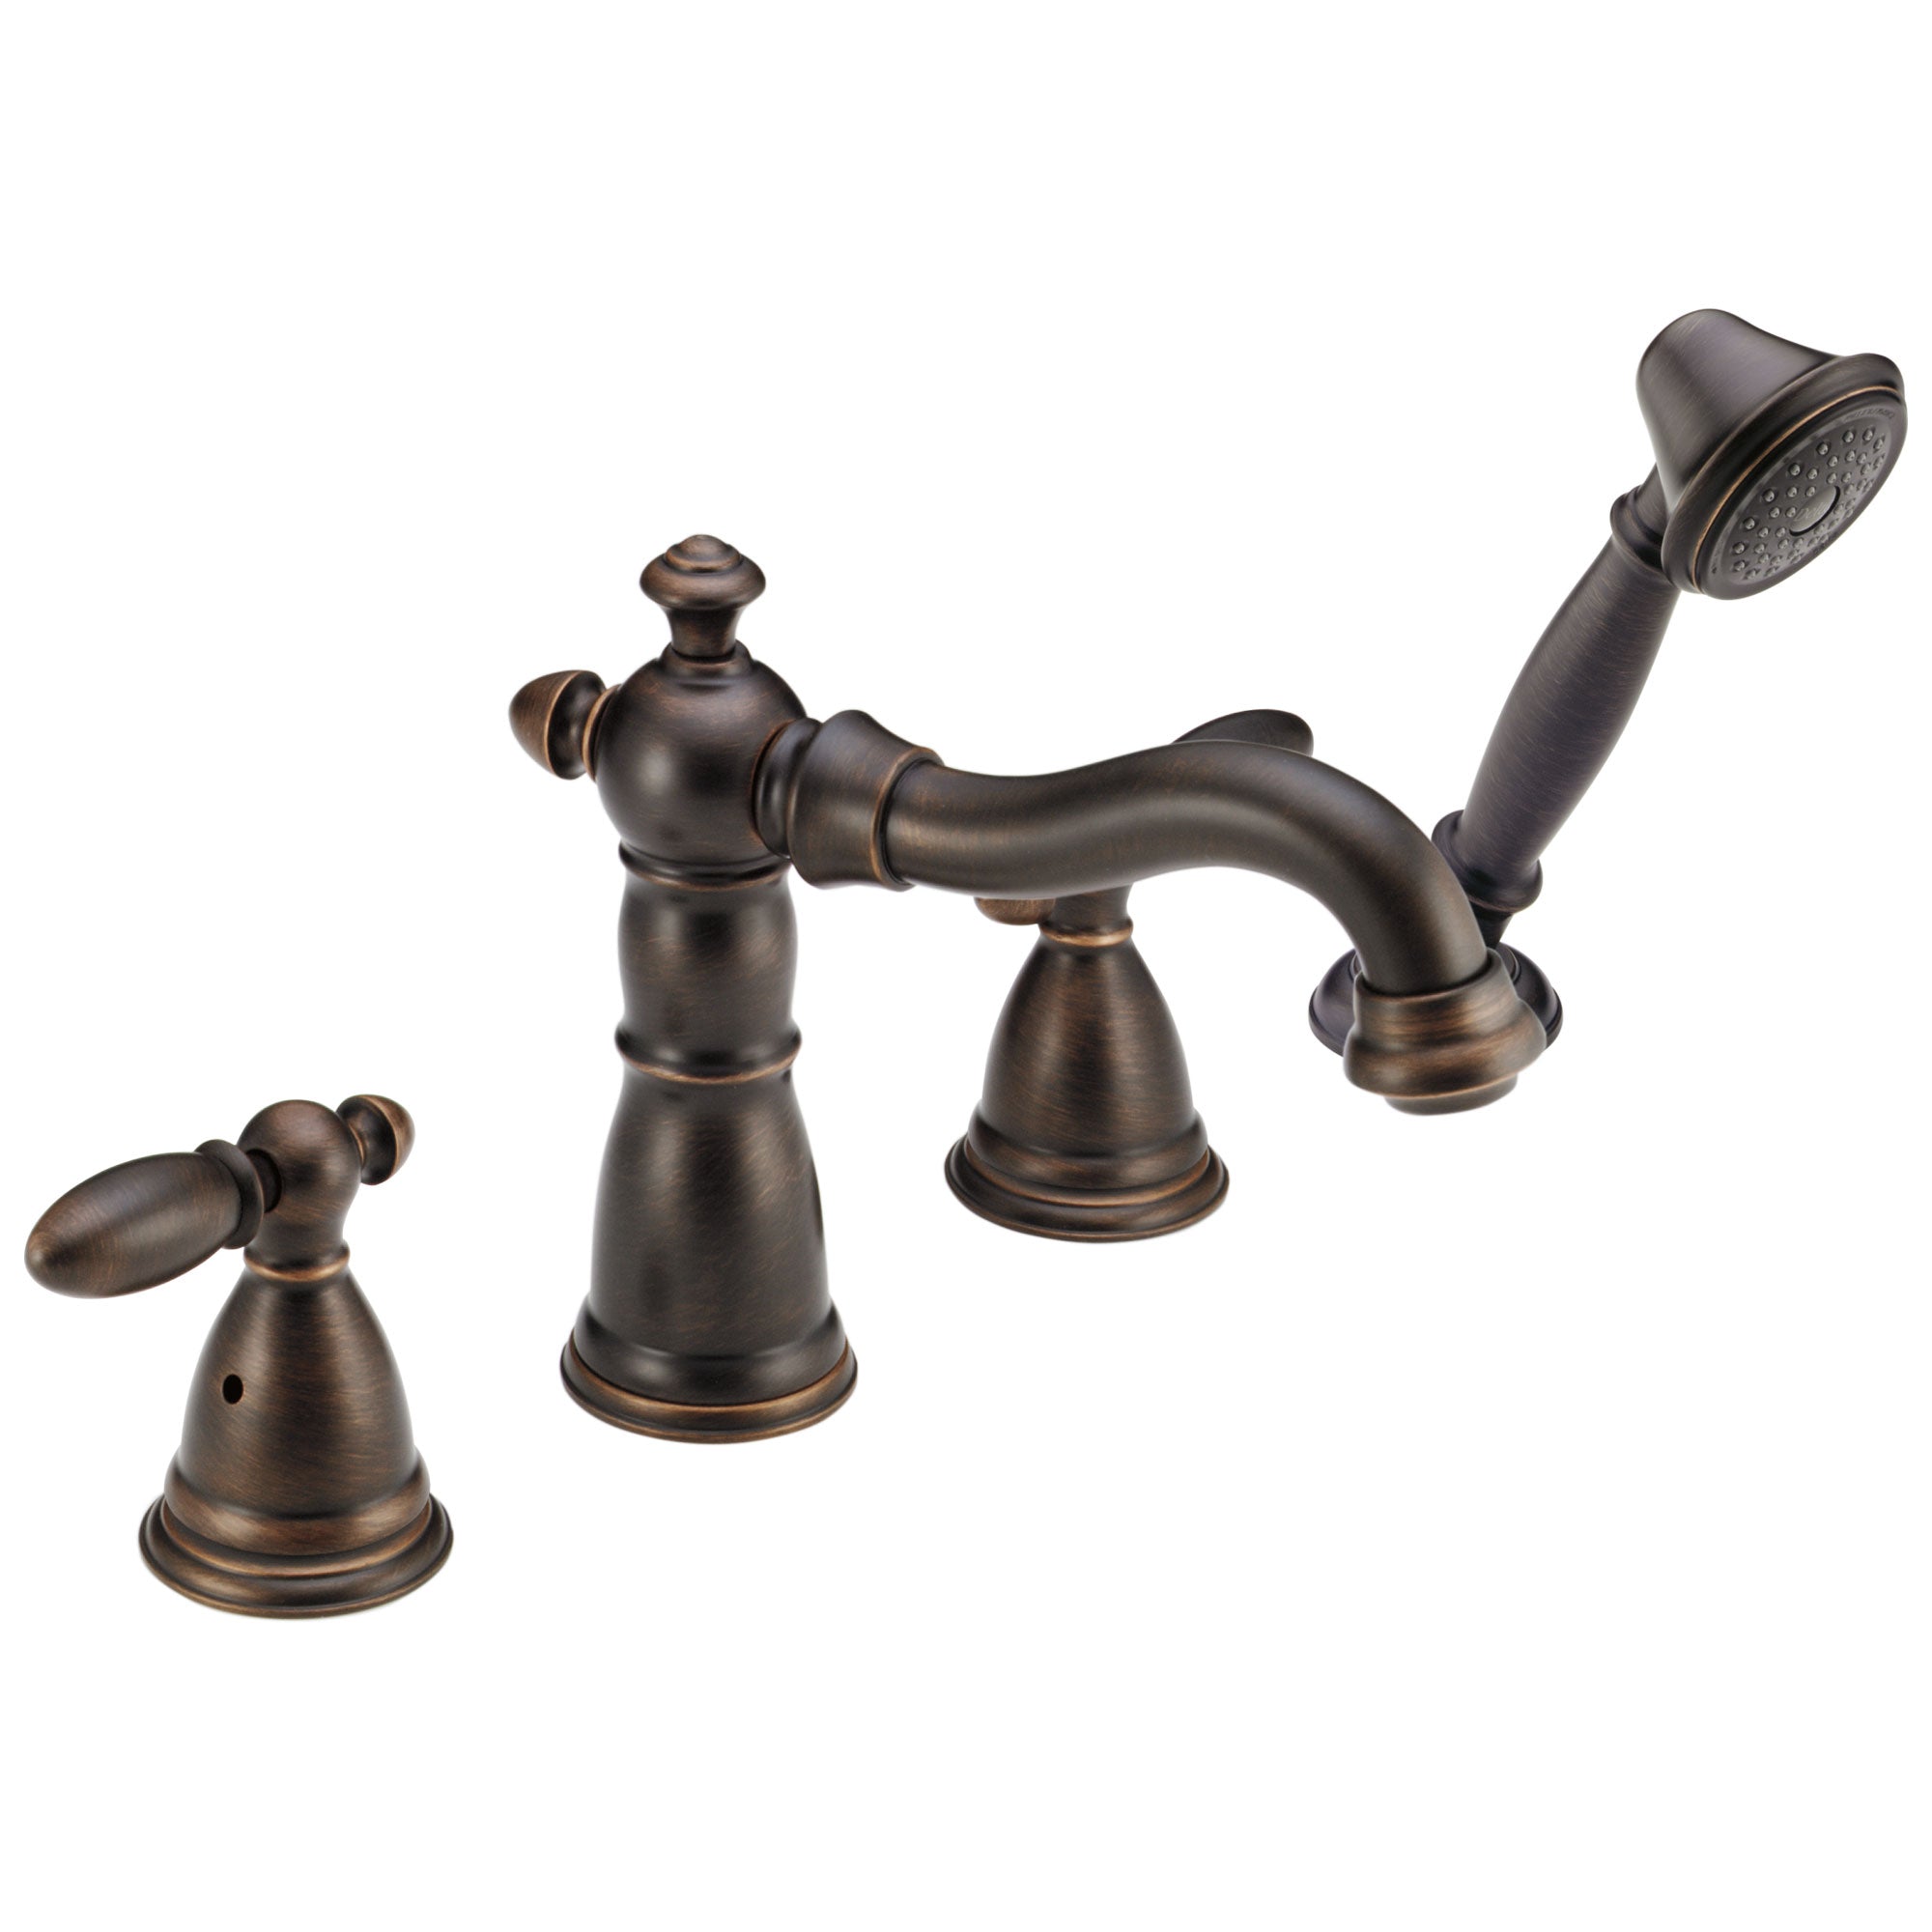 Delta Victorian Collection Venetian Bronze Traditional Roman Bathtub Faucet with Hand Shower INCLUDES (2) Lever Handles and Rough-in Valve D1421V